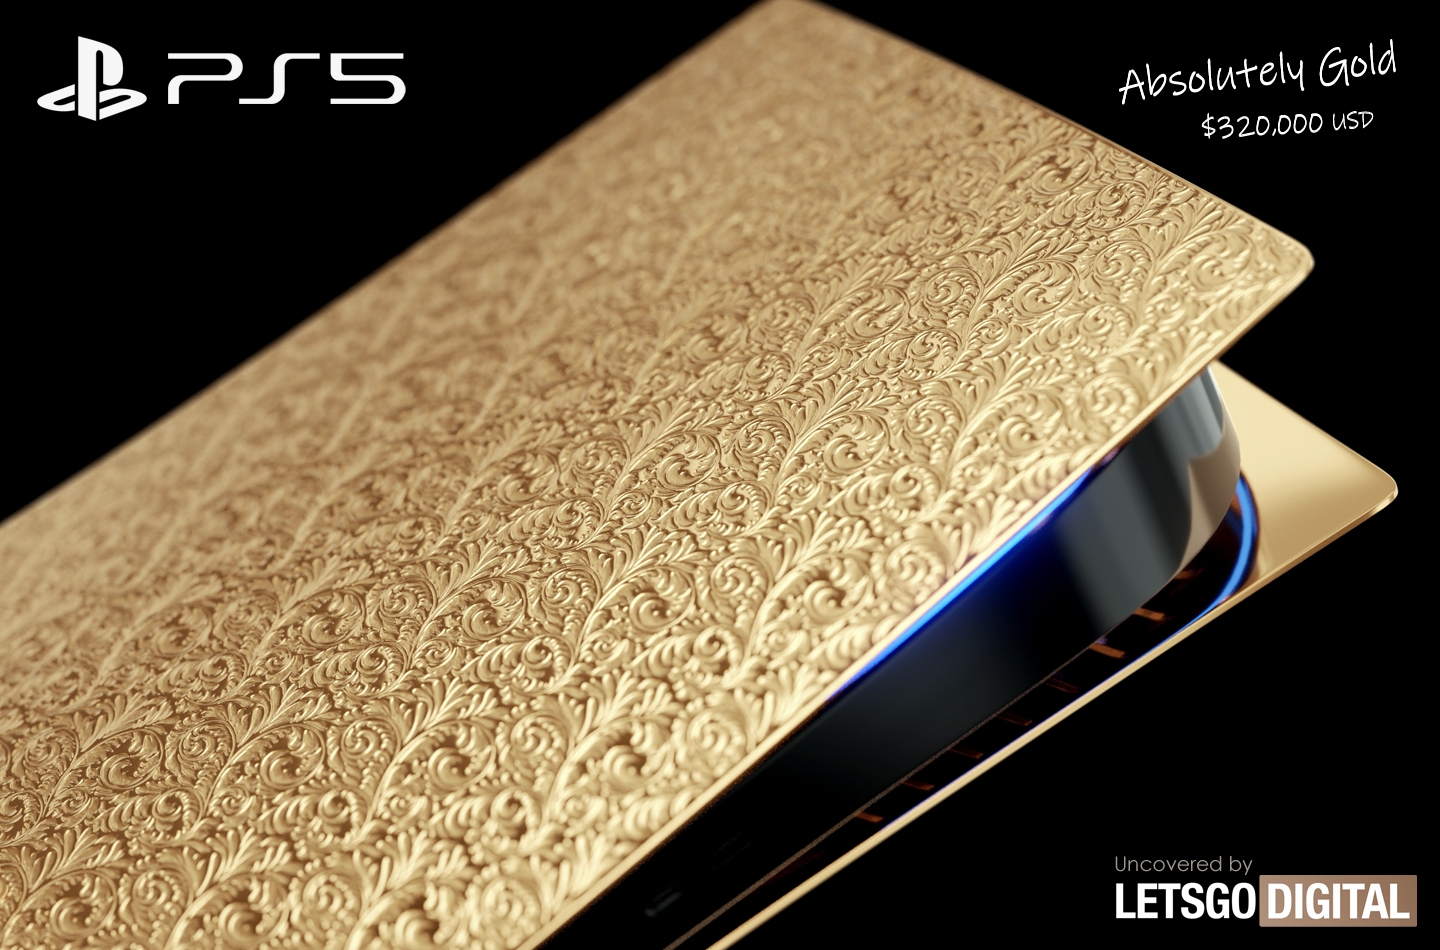 The mother of all Playstations - This PS5 is clad with 30 kg of pure gold  and costs $1.8 million - Luxurylaunches